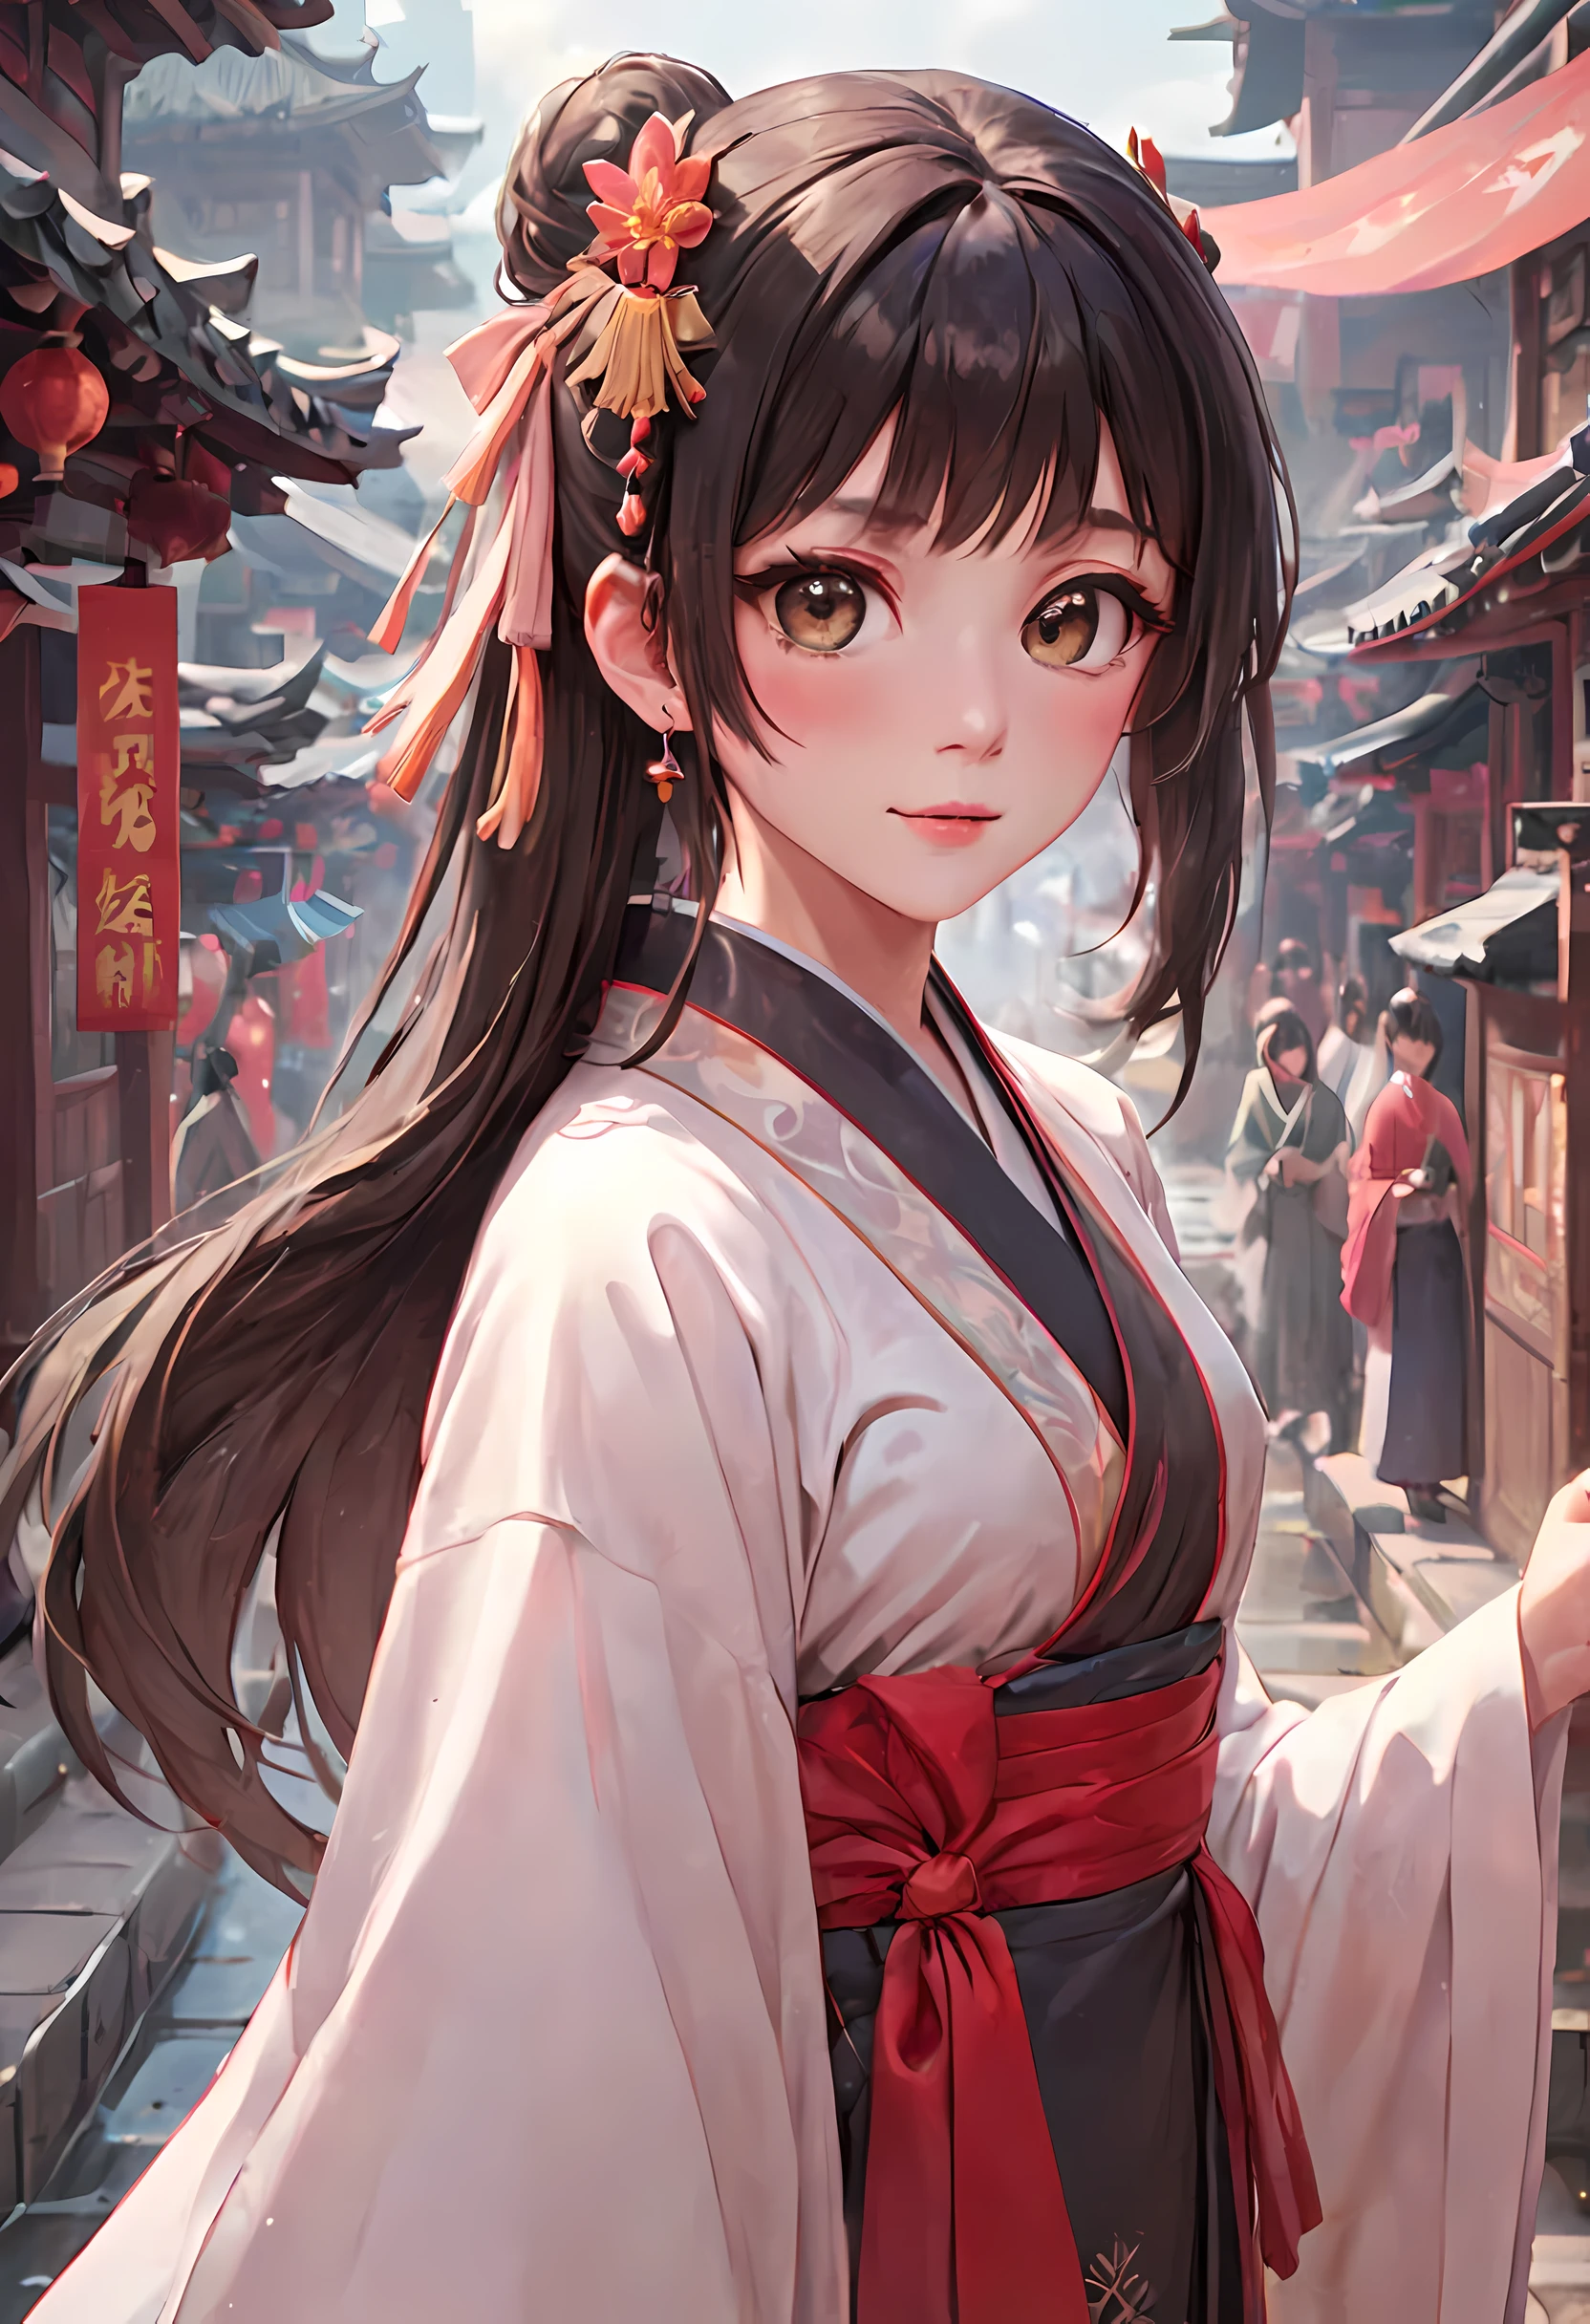 (best quality,masterpiece:1.2),(perfect face:1.5),(Bright Eyes:1.3),Animation scene of a beautiful girl wearing Hanfu walking on a busy street,smiling,(Palace and majestic tower atop the waterfall),(low angle shot:1.2),Taoist,(Detailed Hanfu:1.3),guweiz style artwork, Anime Fantasy Illustration, 2.5d cgi anime fantasy artwork, anime fantasy artwork, anime art wallpaper 4k, anime art wallpaper 4k, anime style 4k, Chinese fantasy, fantasy art style, A beautiful artistic illustration, Anime Fantasy Illustration, beautiful fantasy art